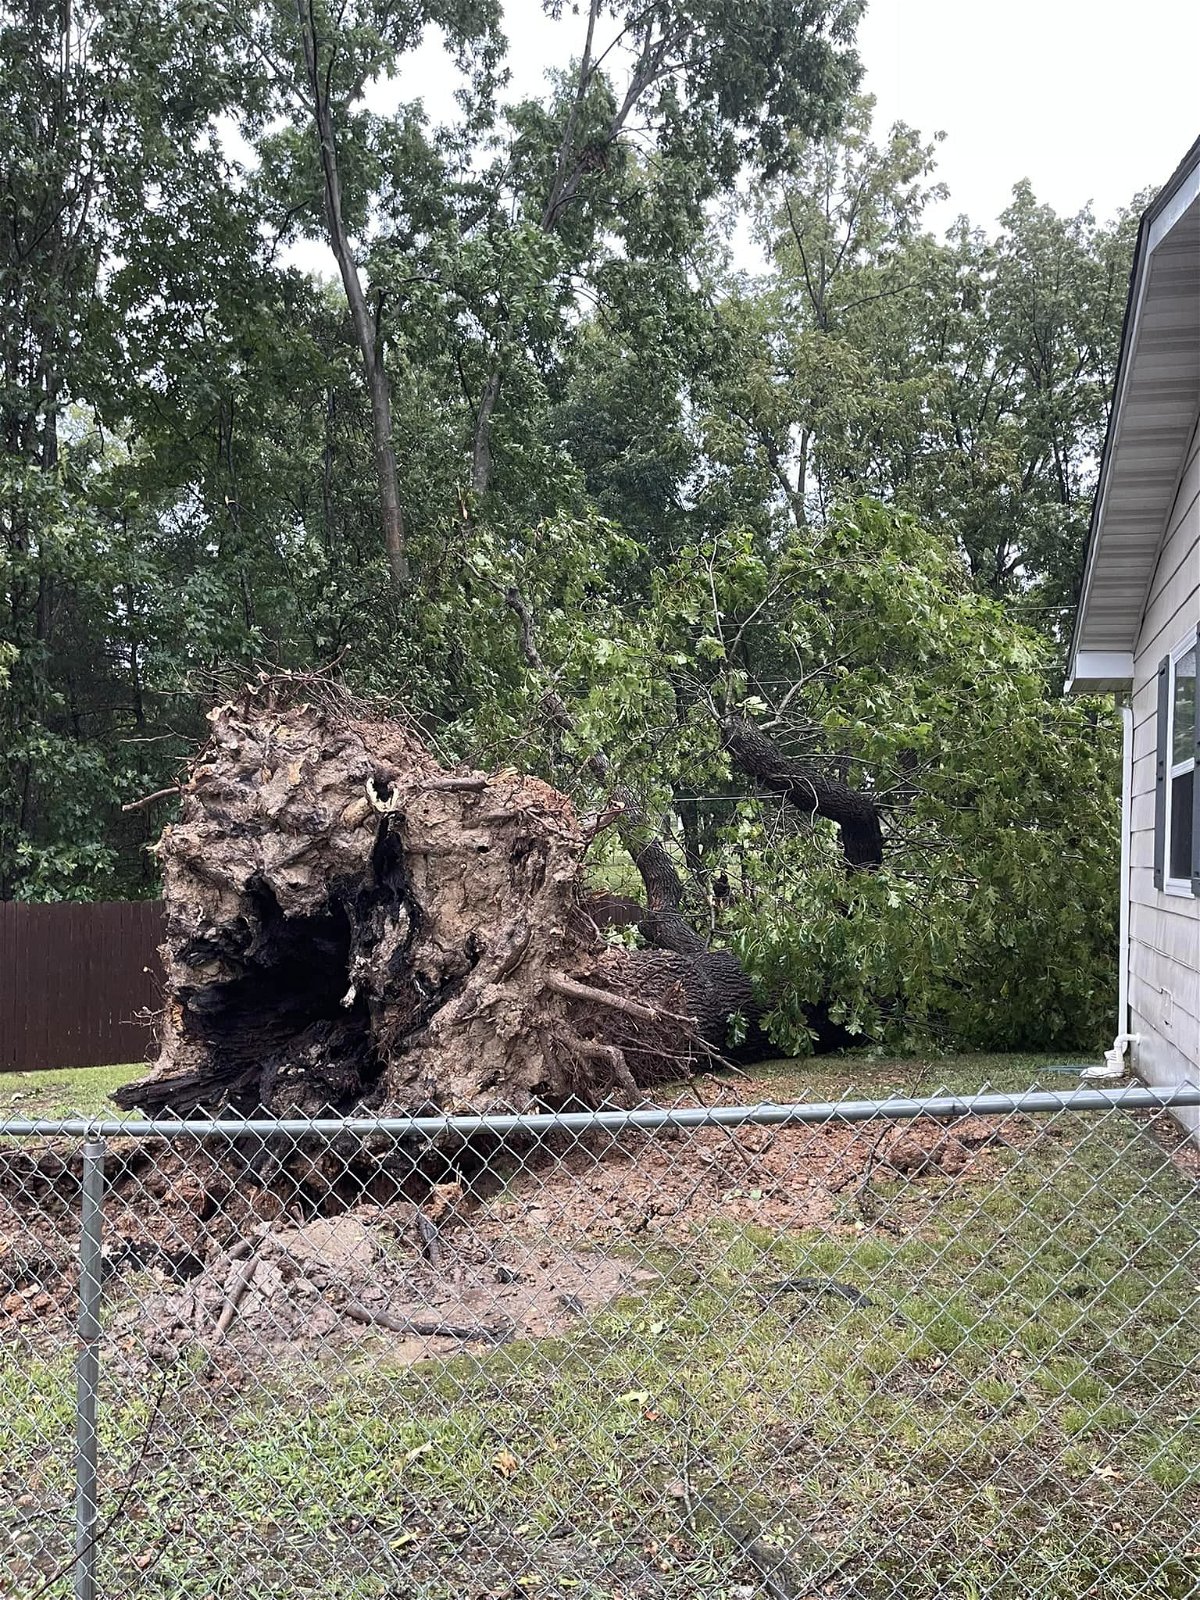 Storms knocked down a tree in Doolittle on Monday, Sept. 4.